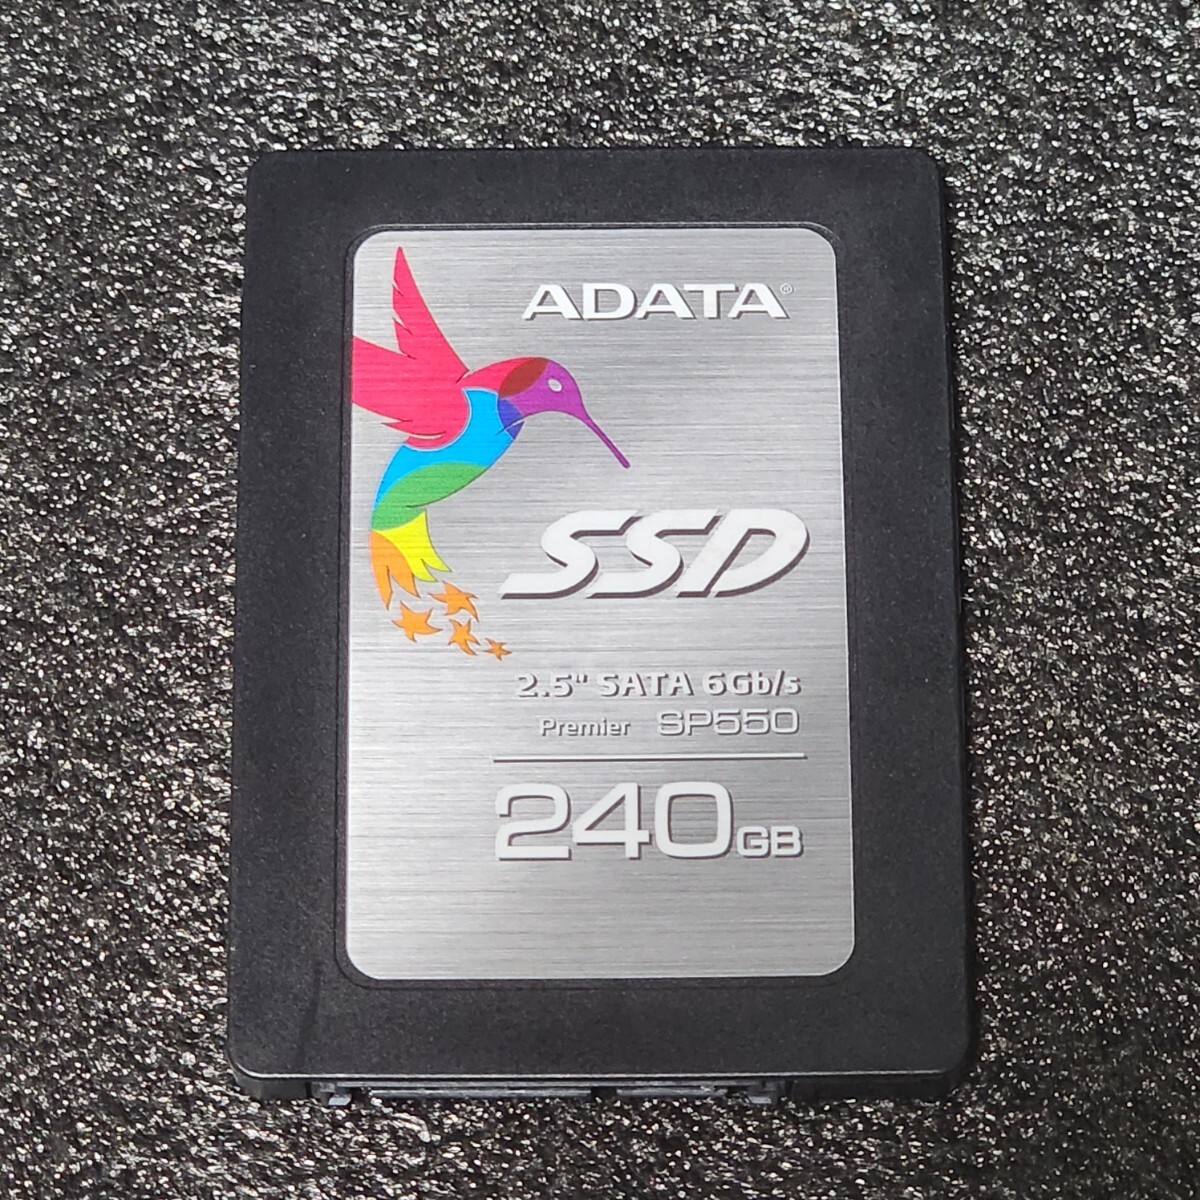 ADATA SP550(ASP550-240GM-B) 240GB SATA SSD normal goods 2.5 -inch built-in SSD format settled PC parts operation verification settled 250GB 256GB